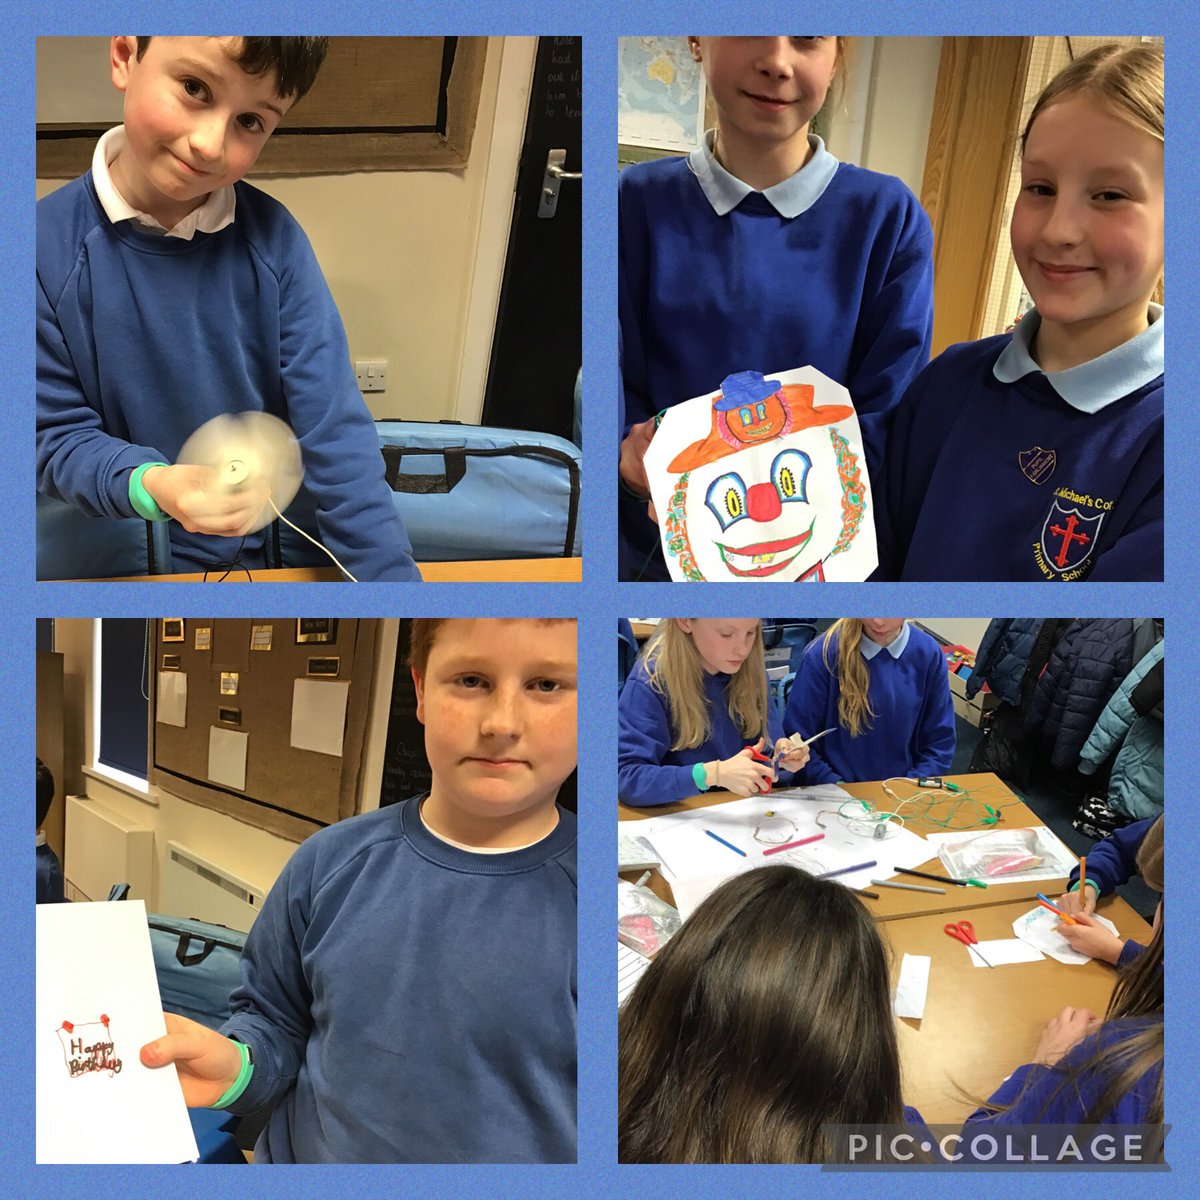 Last week, Y5/6 created their own interactive game/activity using different elements of circuits 💡 The children used their problem solving skills and teamwork to overcome challenges that arose ⭐️